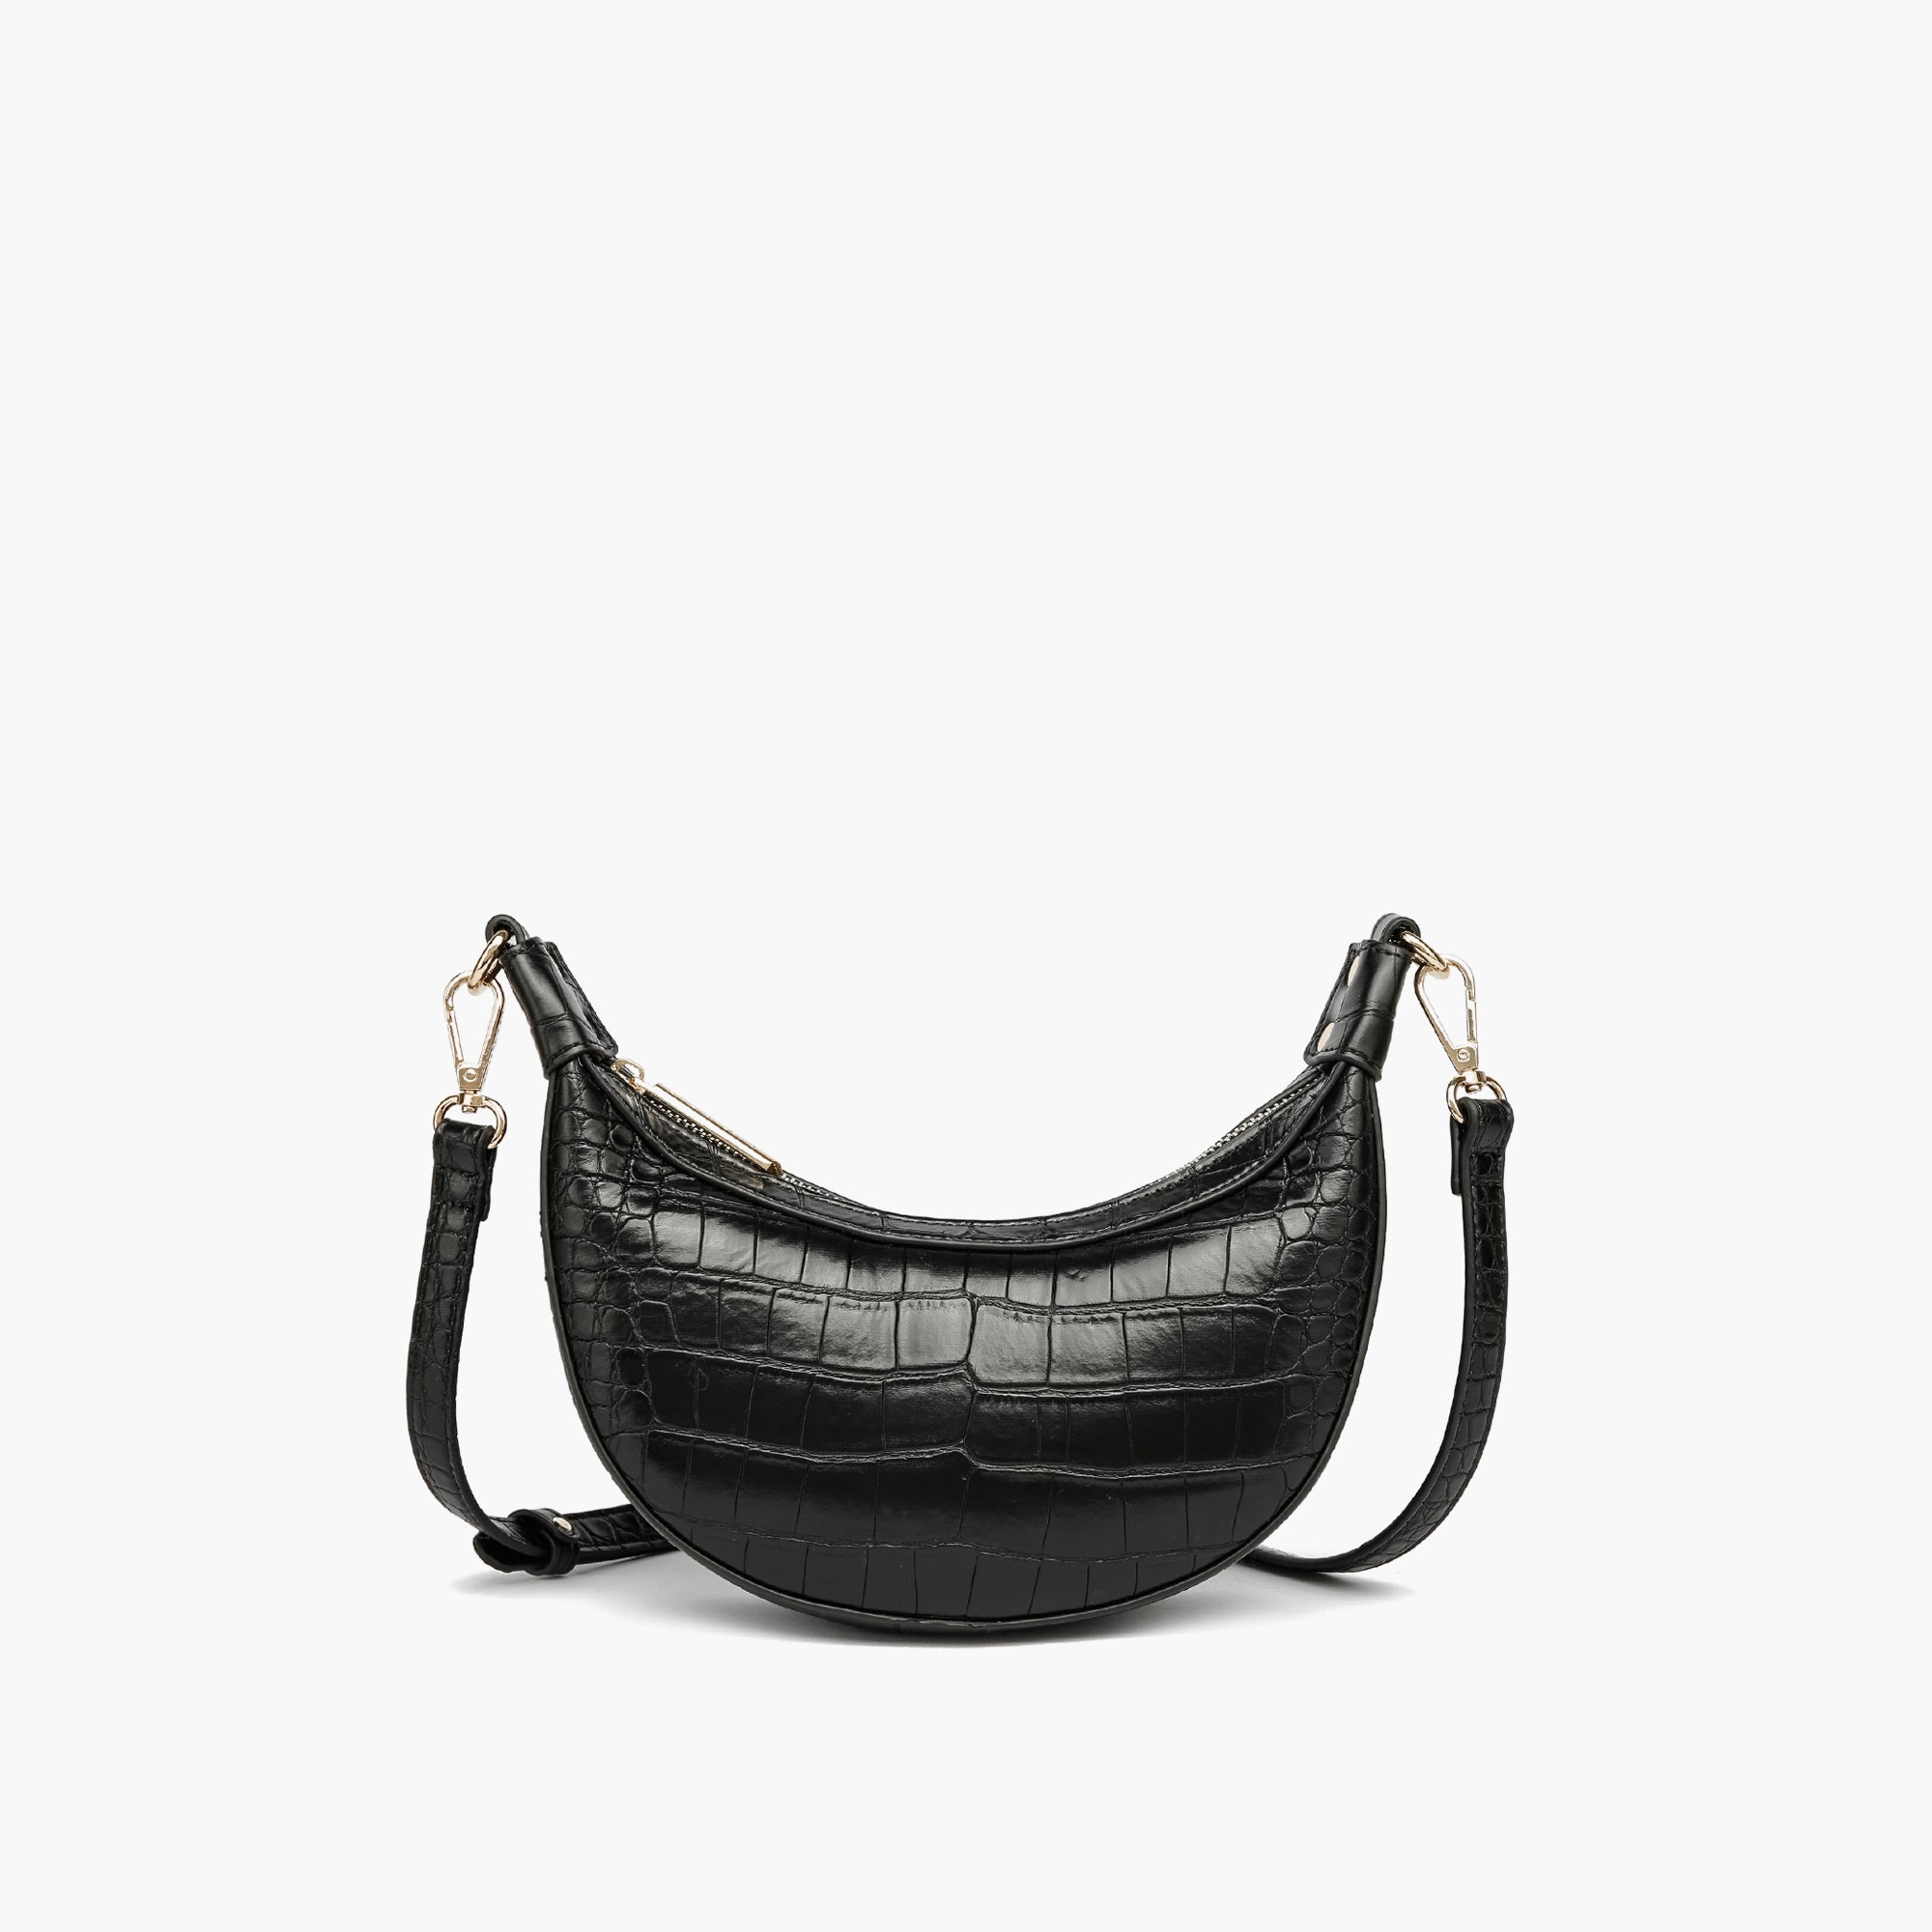 Buy MYRIAD Classic Black Synthetic Leather Crossbody Purse Crocodile  Embossed Crescent-Shaped Shoulder Bag (11 x 6.5 x 2.5 Inches) Pack of 1  BLACK at Amazon.in